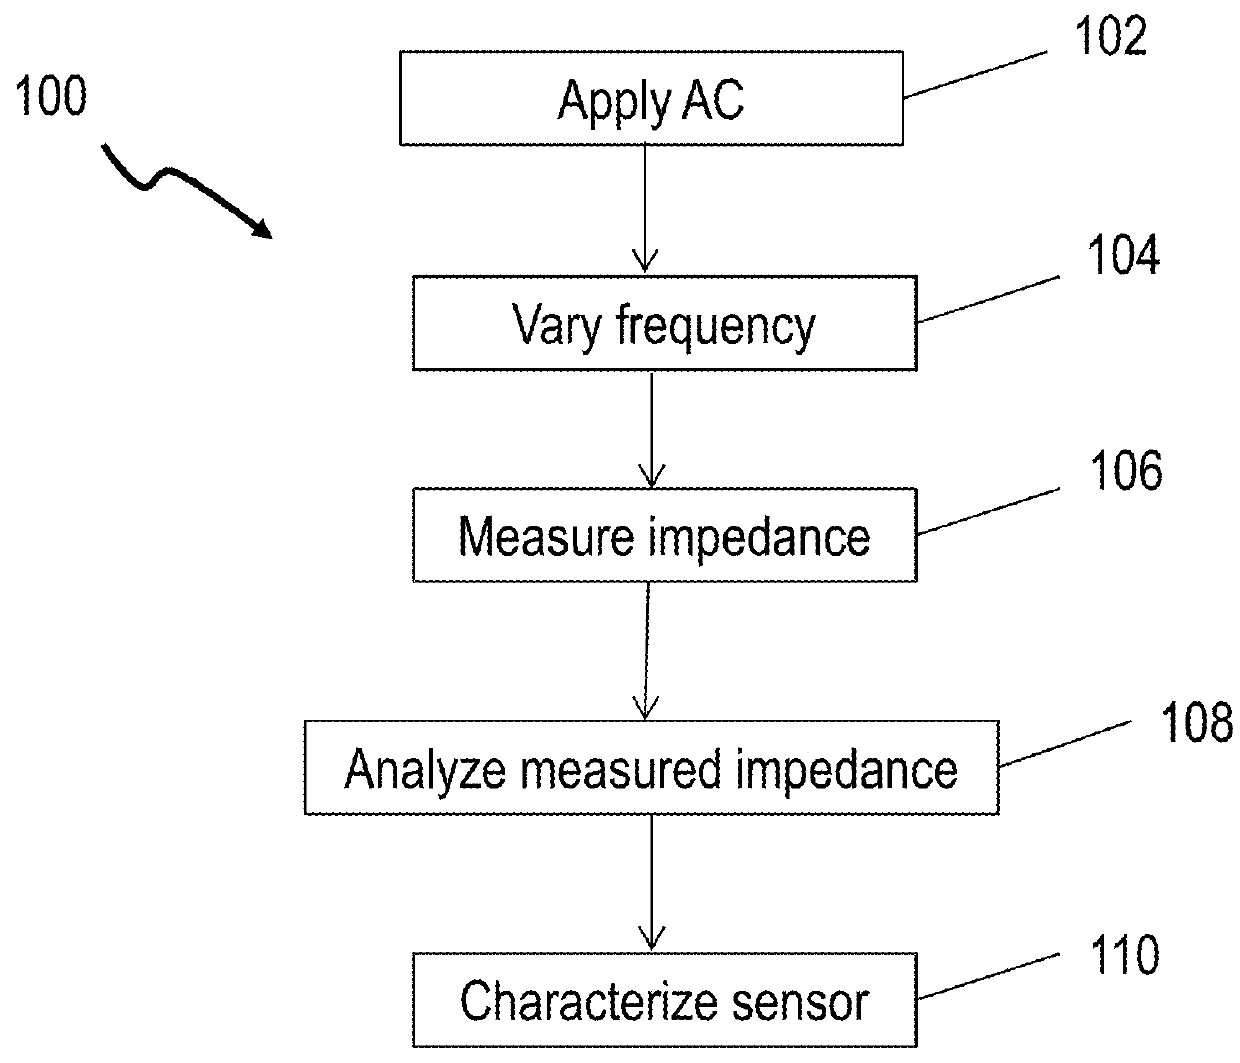 Characterization and failure analysis of a sensor using impedance frequency response spectra